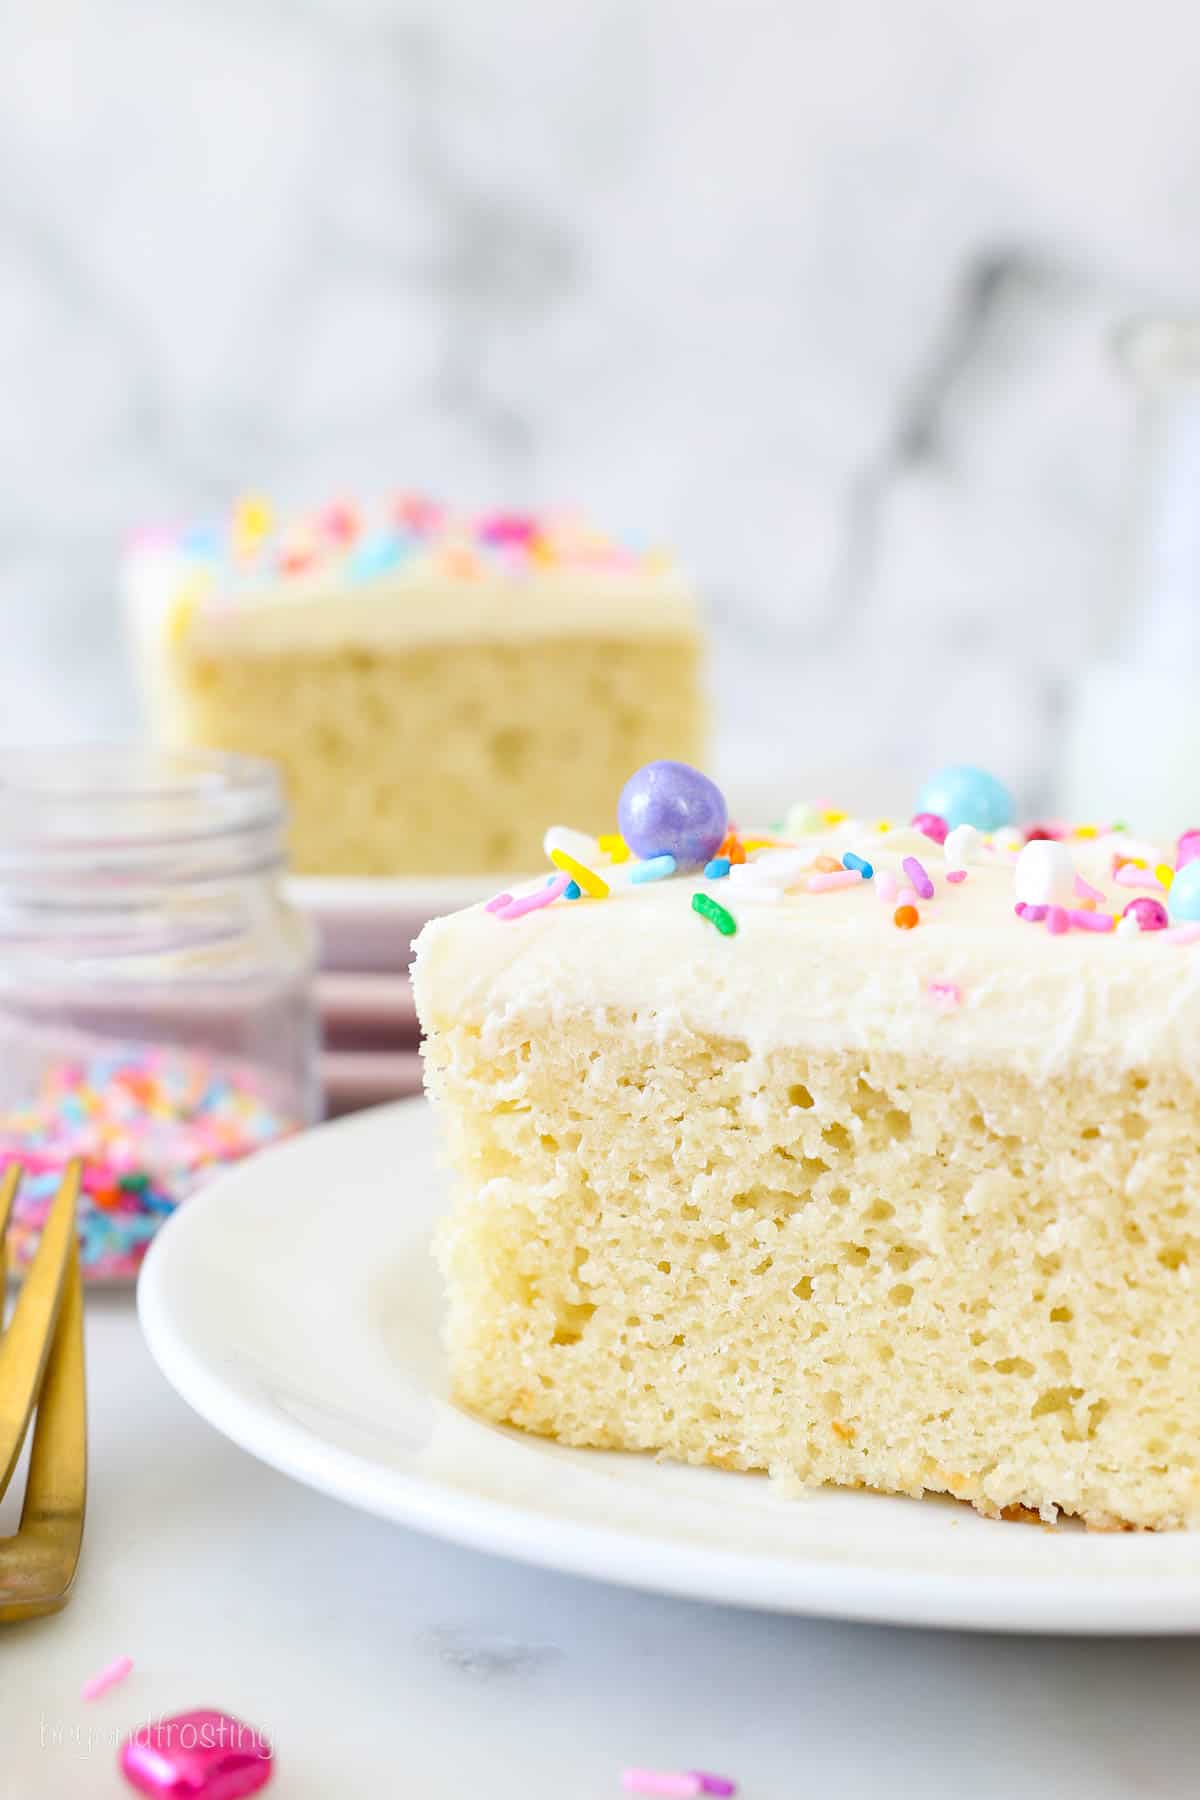 A slice of frosted vanilla cake on a white plate, garnished with rainbow sprinkles, with another slice of cake in the background.